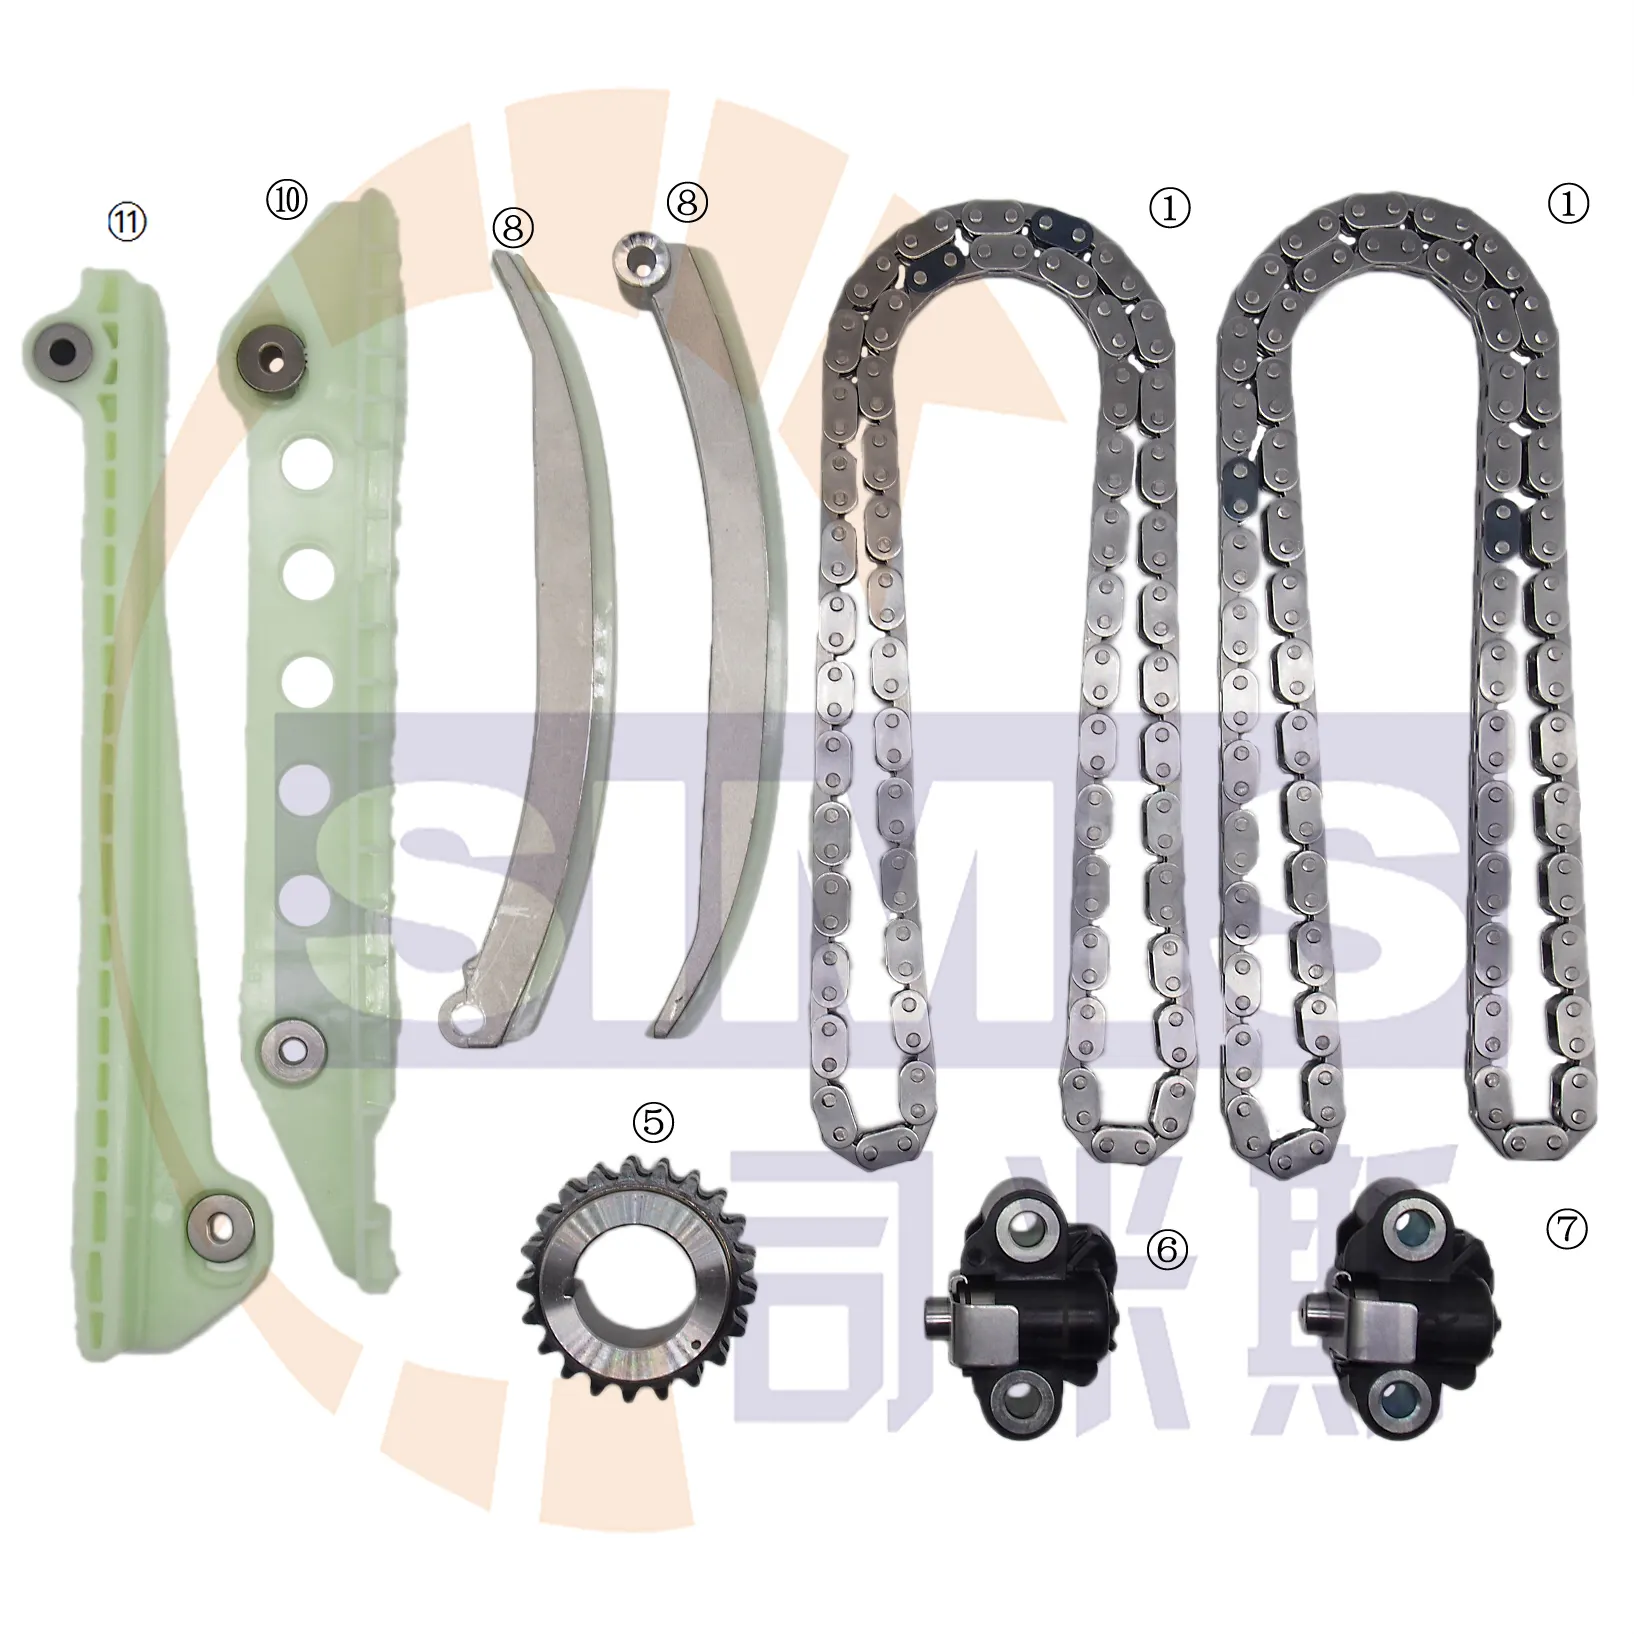 SIMIS PARTS Timing chain kit used for ford Explorer Racing E150 F150 Lincoln Mercury 4.6L